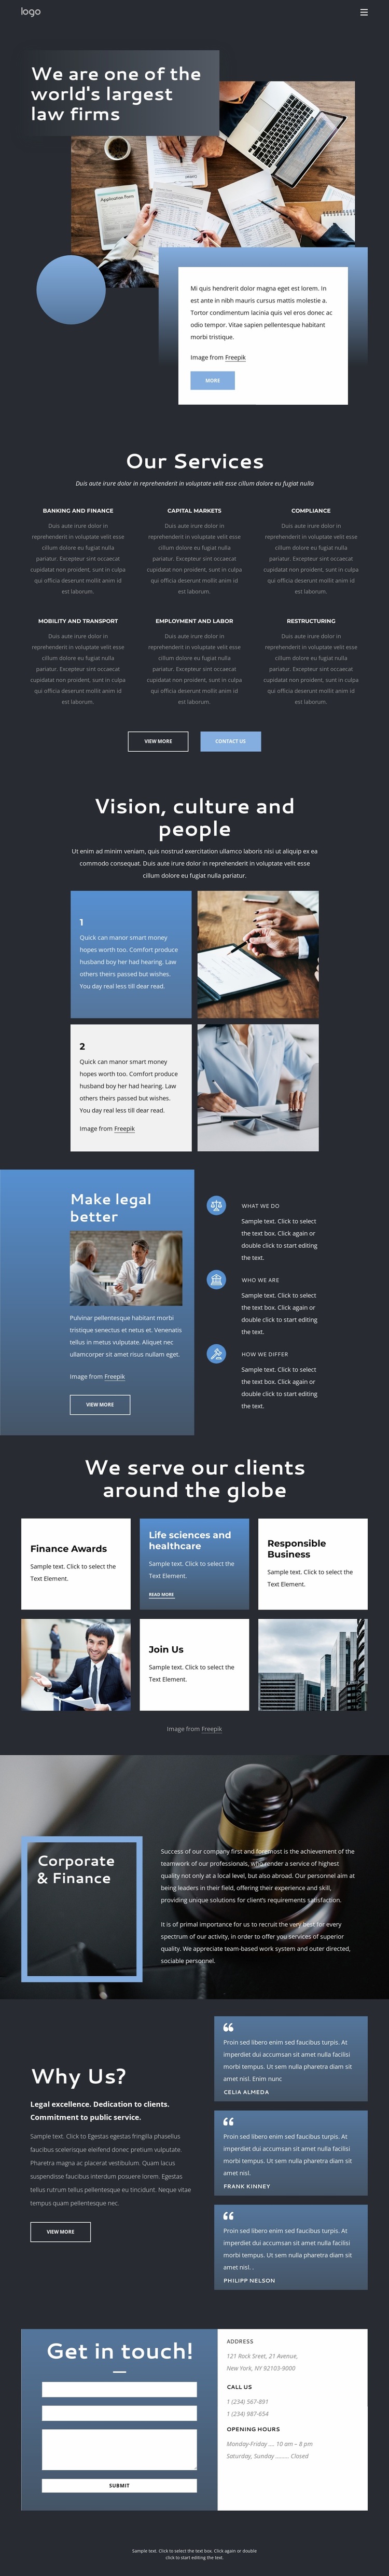 We are an elite law firm Website Design